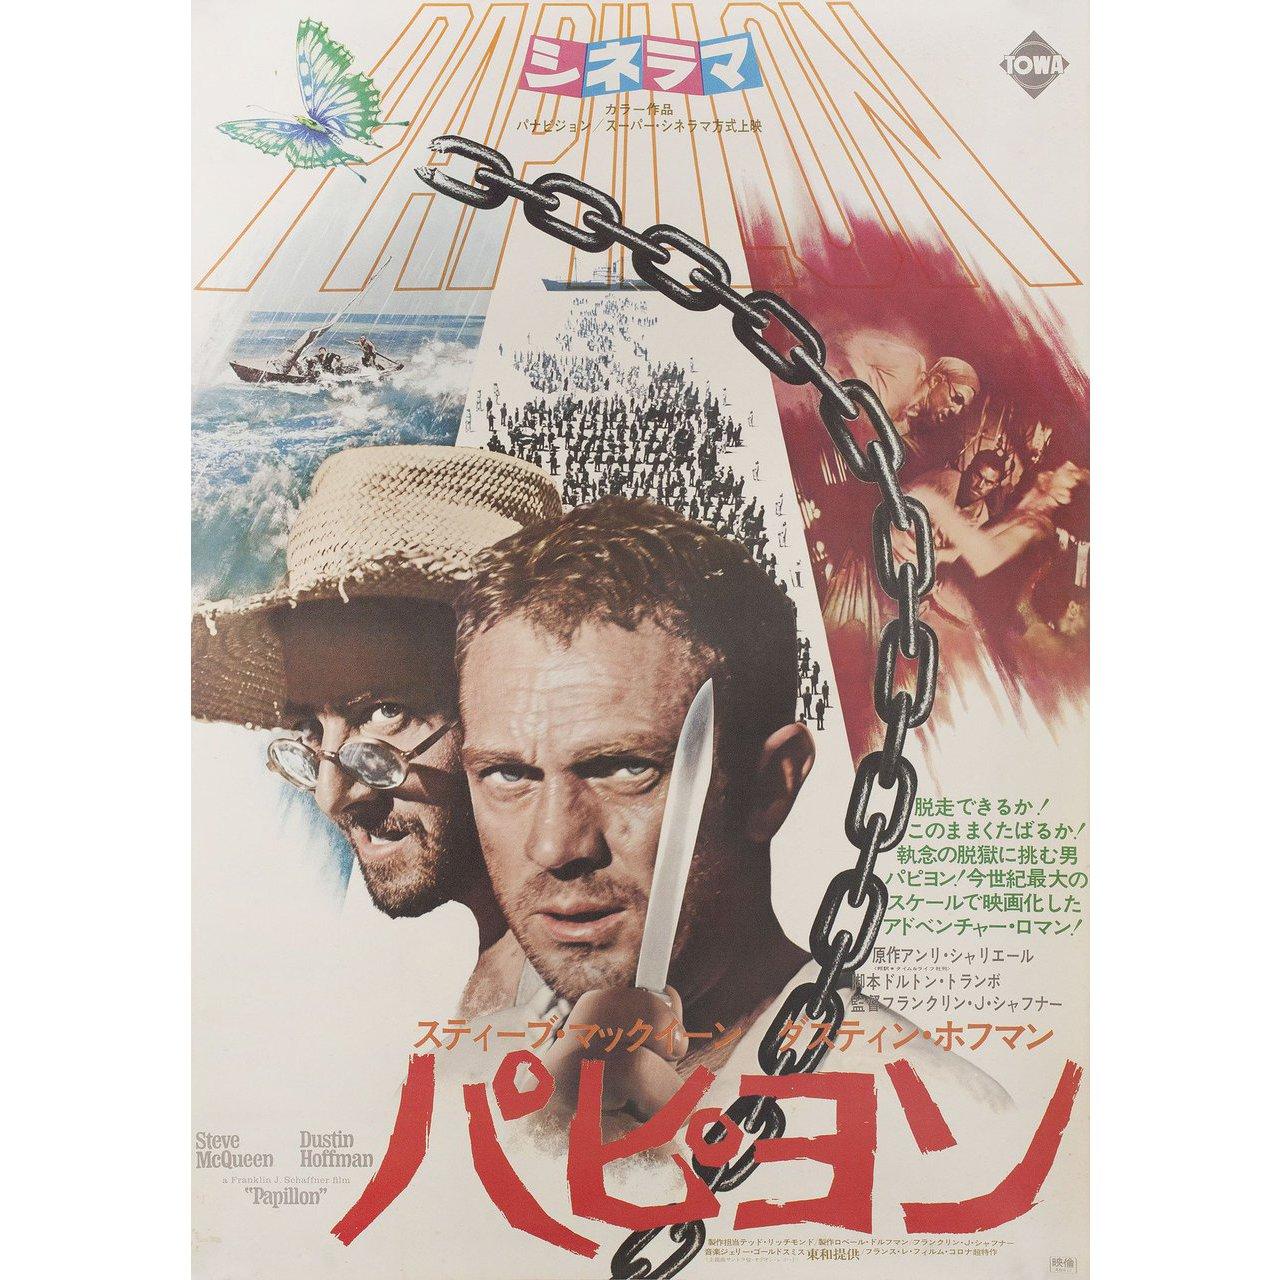 Original 1973 Japanese B2 poster for the film Papillon directed by Franklin J. Schaffner with Steve McQueen / Dustin Hoffman / Victor Jory / Don Gordon. Very good fine condition, rolled. Please note: the size is stated in inches and the actual size